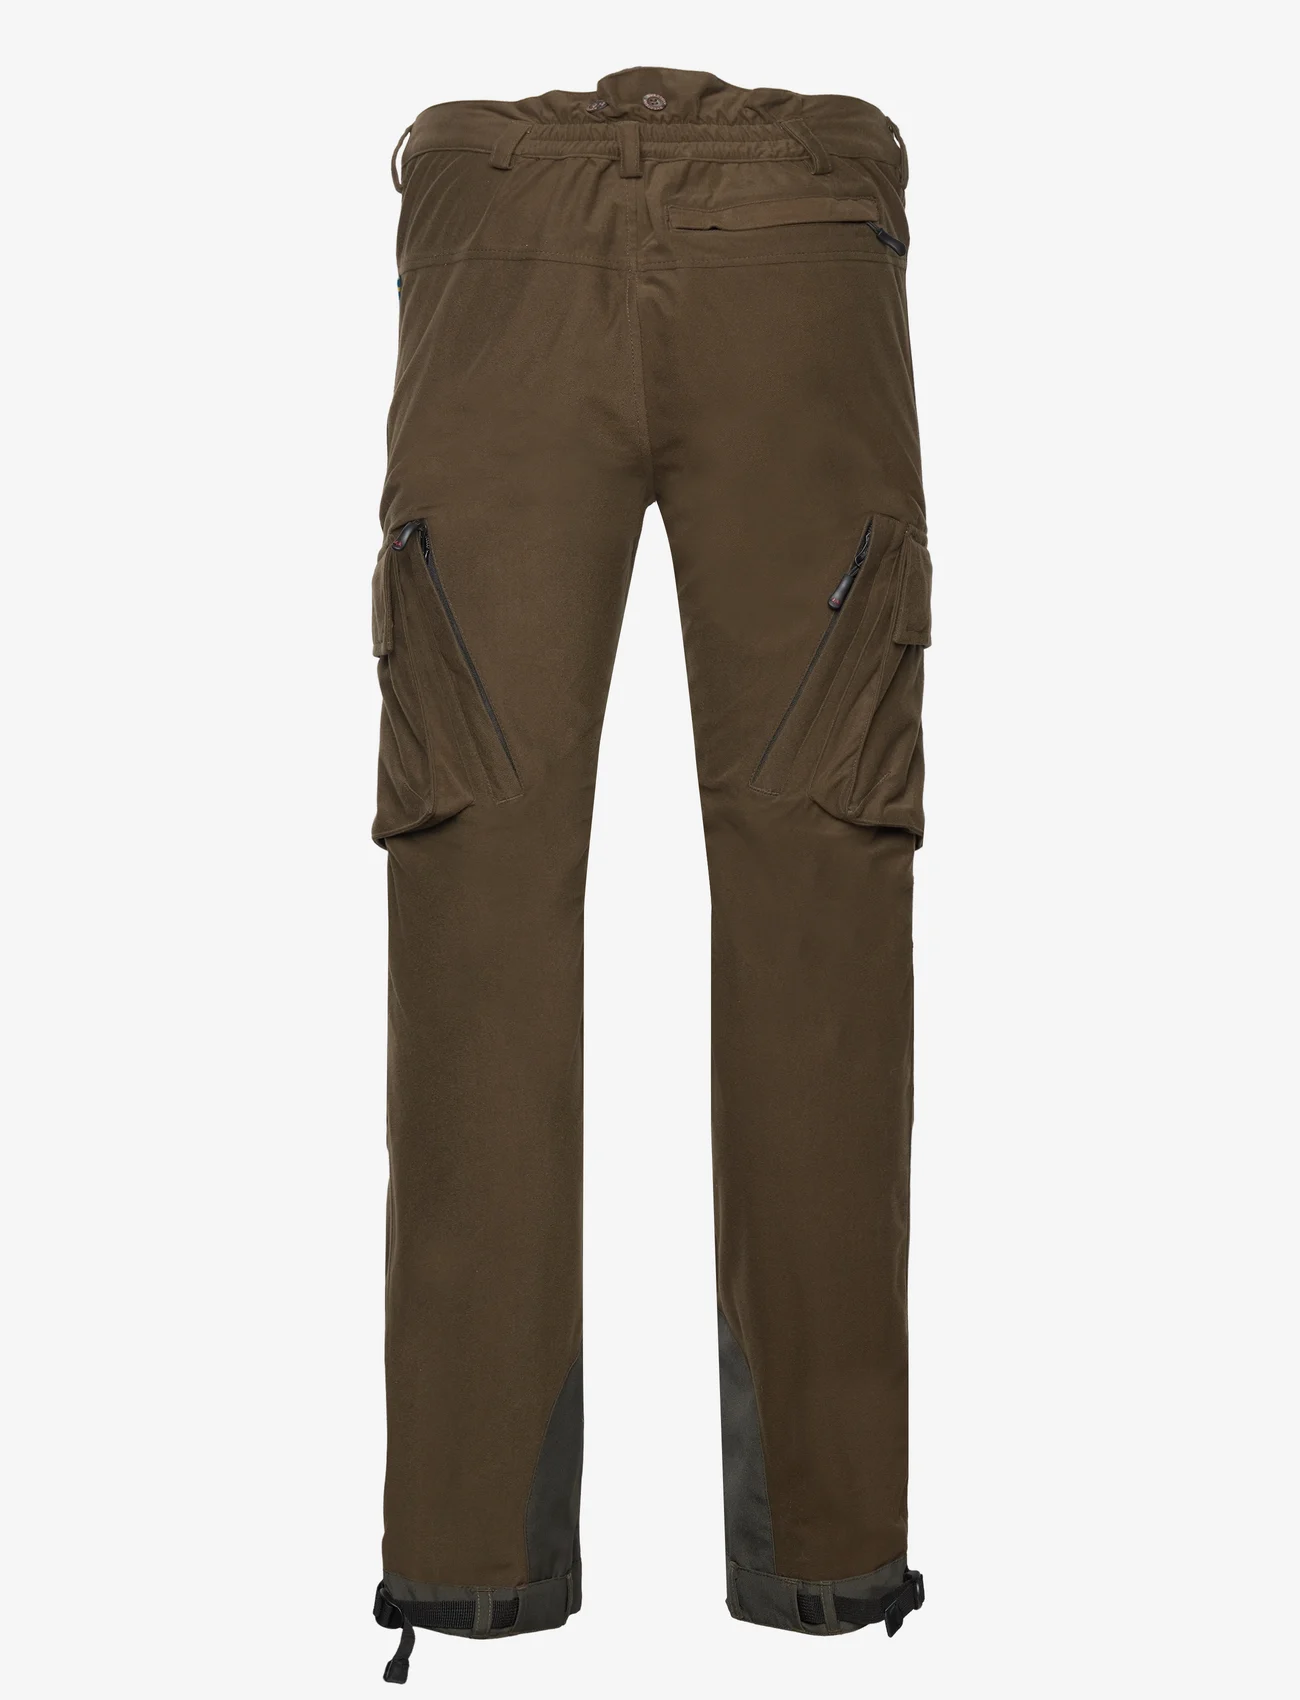 Swedteam - Ridge Hunting Trouser - outdoor pants - forest green - 1